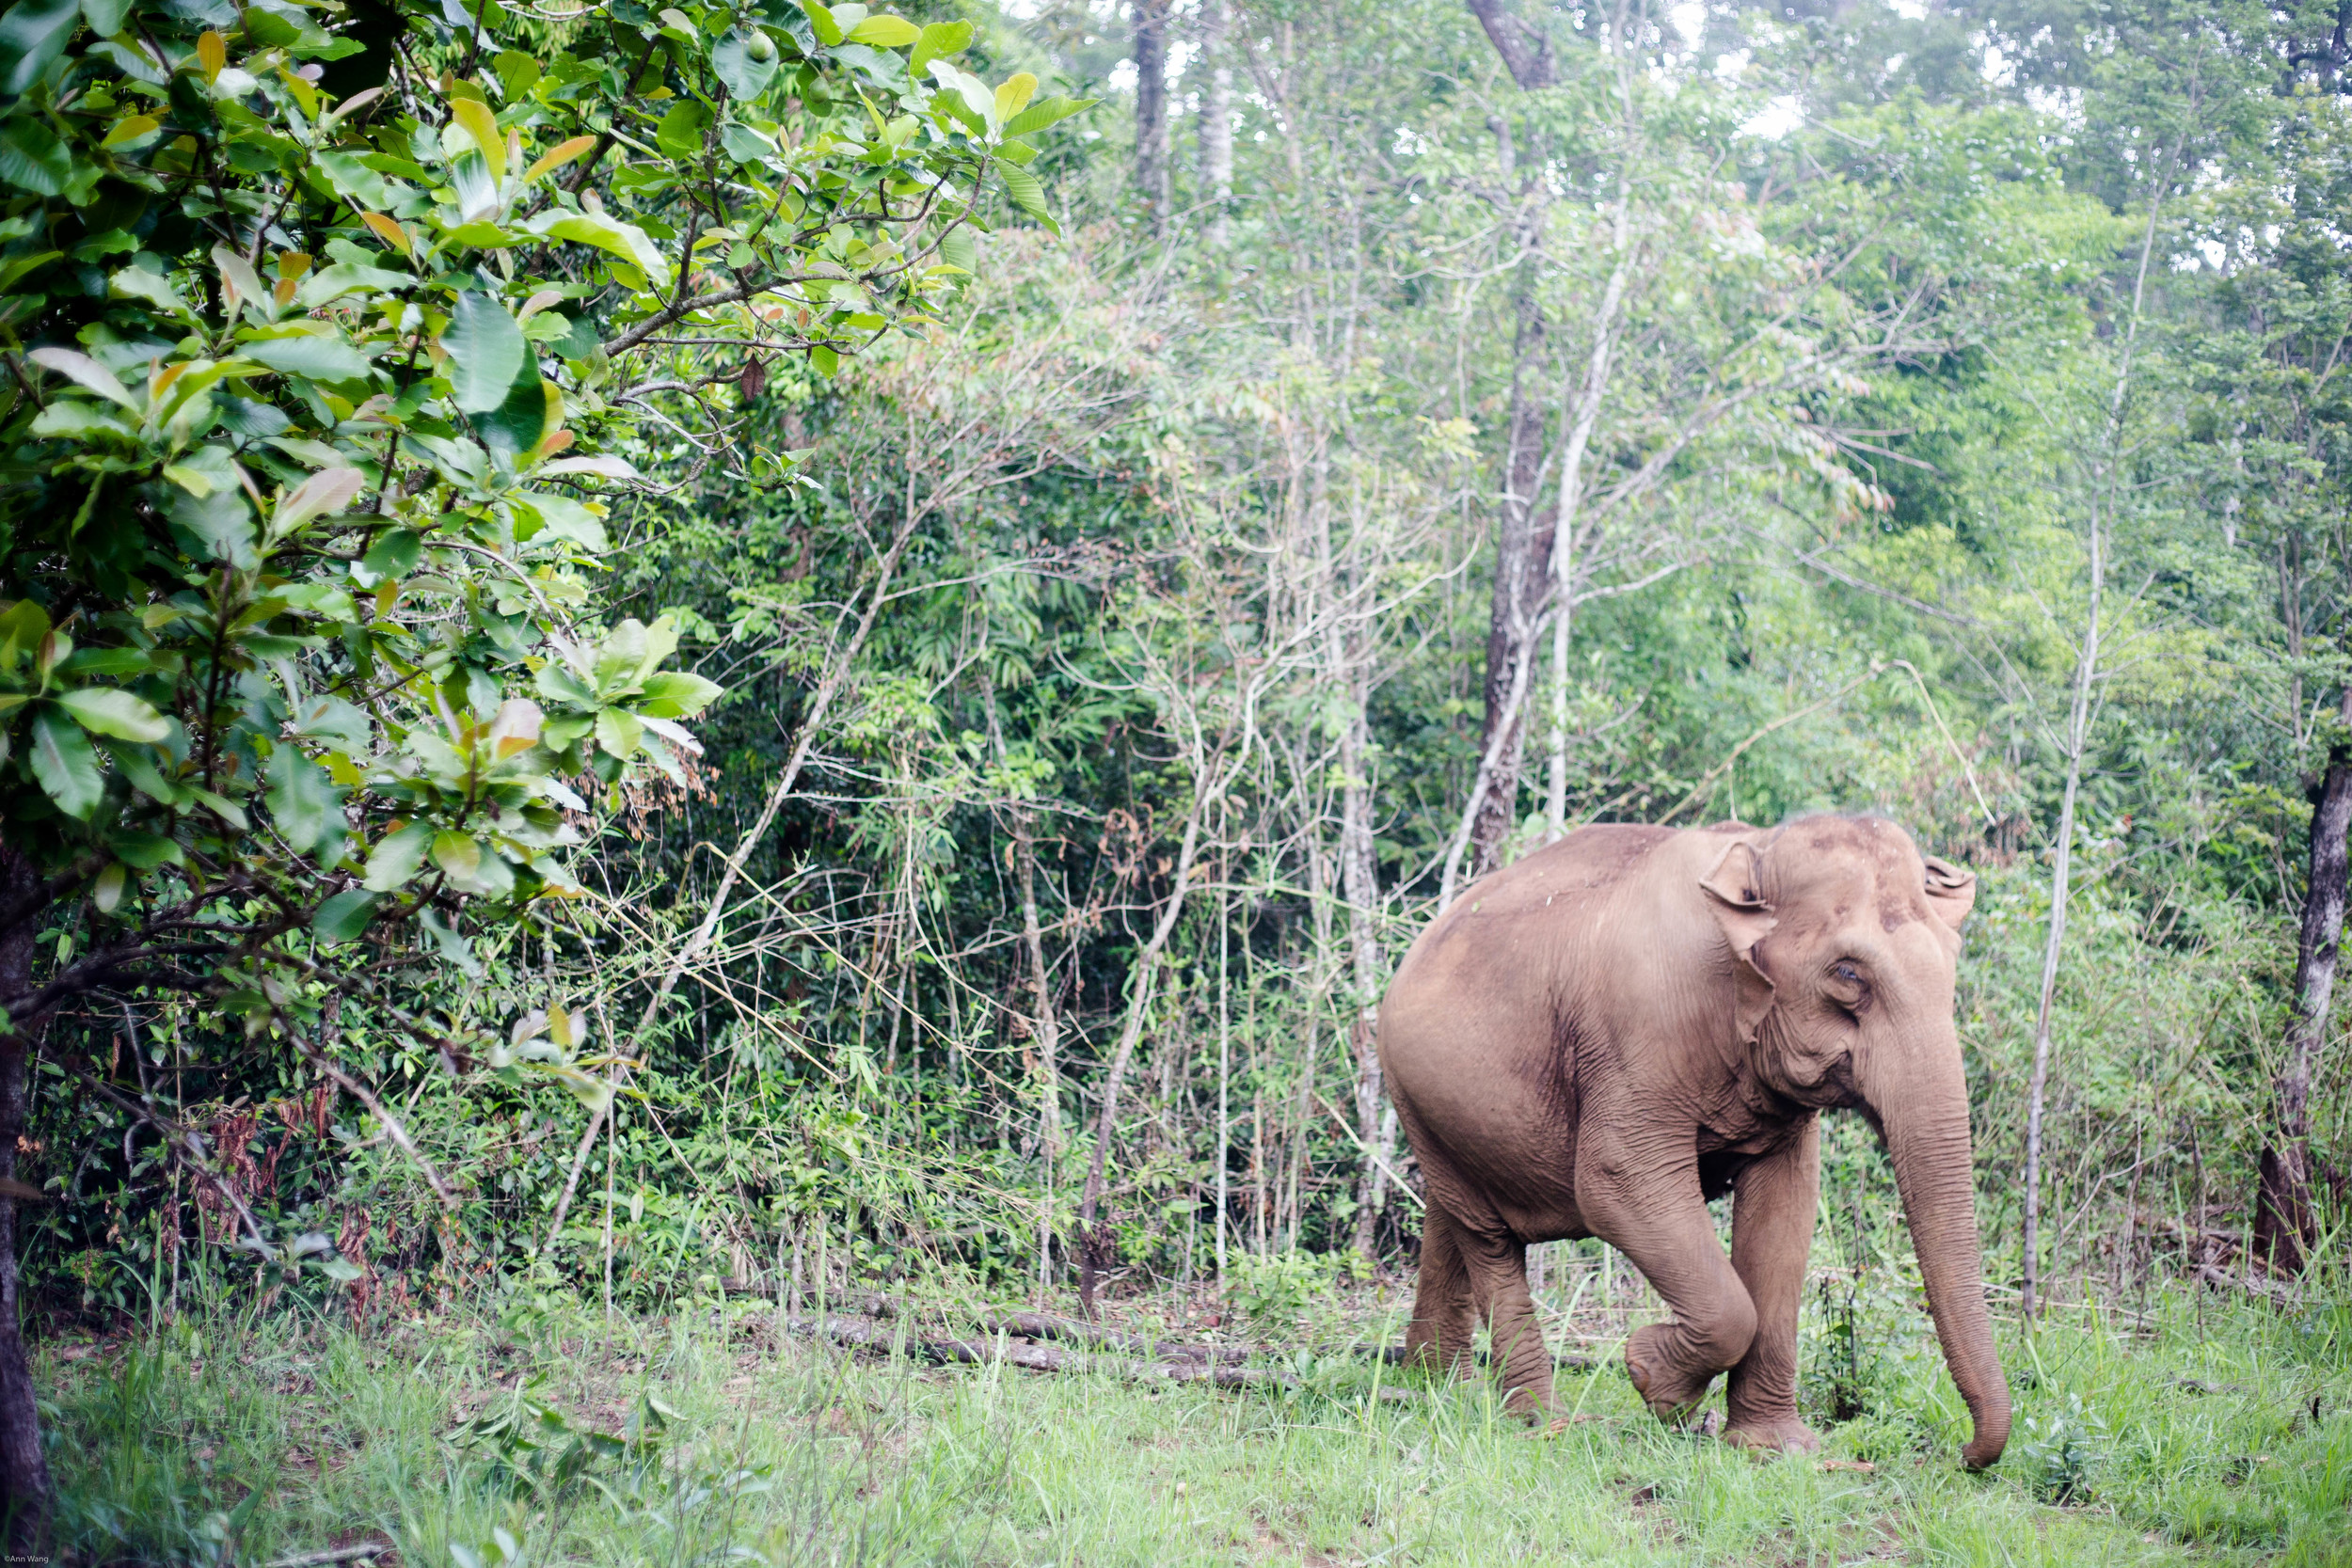  "The Mondulkiri Project" -Protecting the land from logging. Renting the elephant from the aboriginal village. Let the elephant walk freely in the protected land. Train aborigines to take care of the elephant or became a guide for "The Mondulkiri Pro